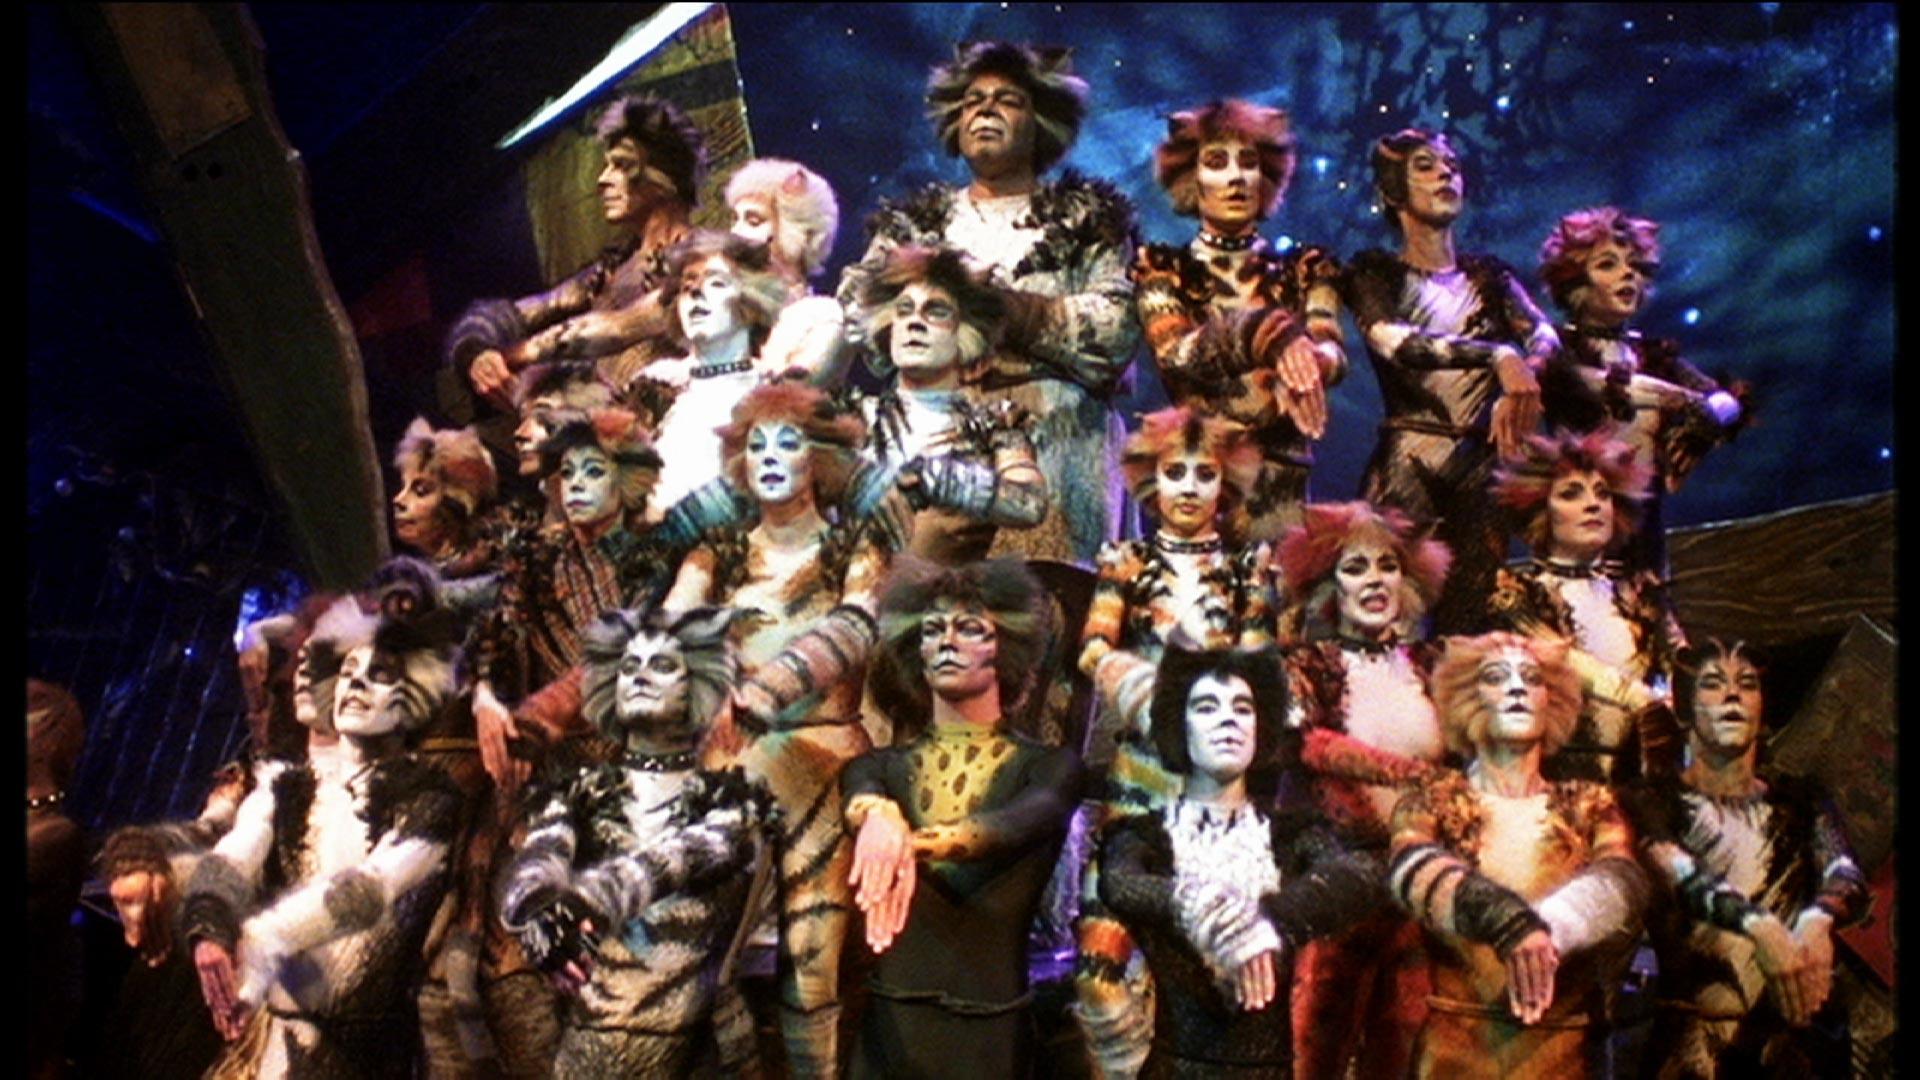 Cats the Musical: A Preview